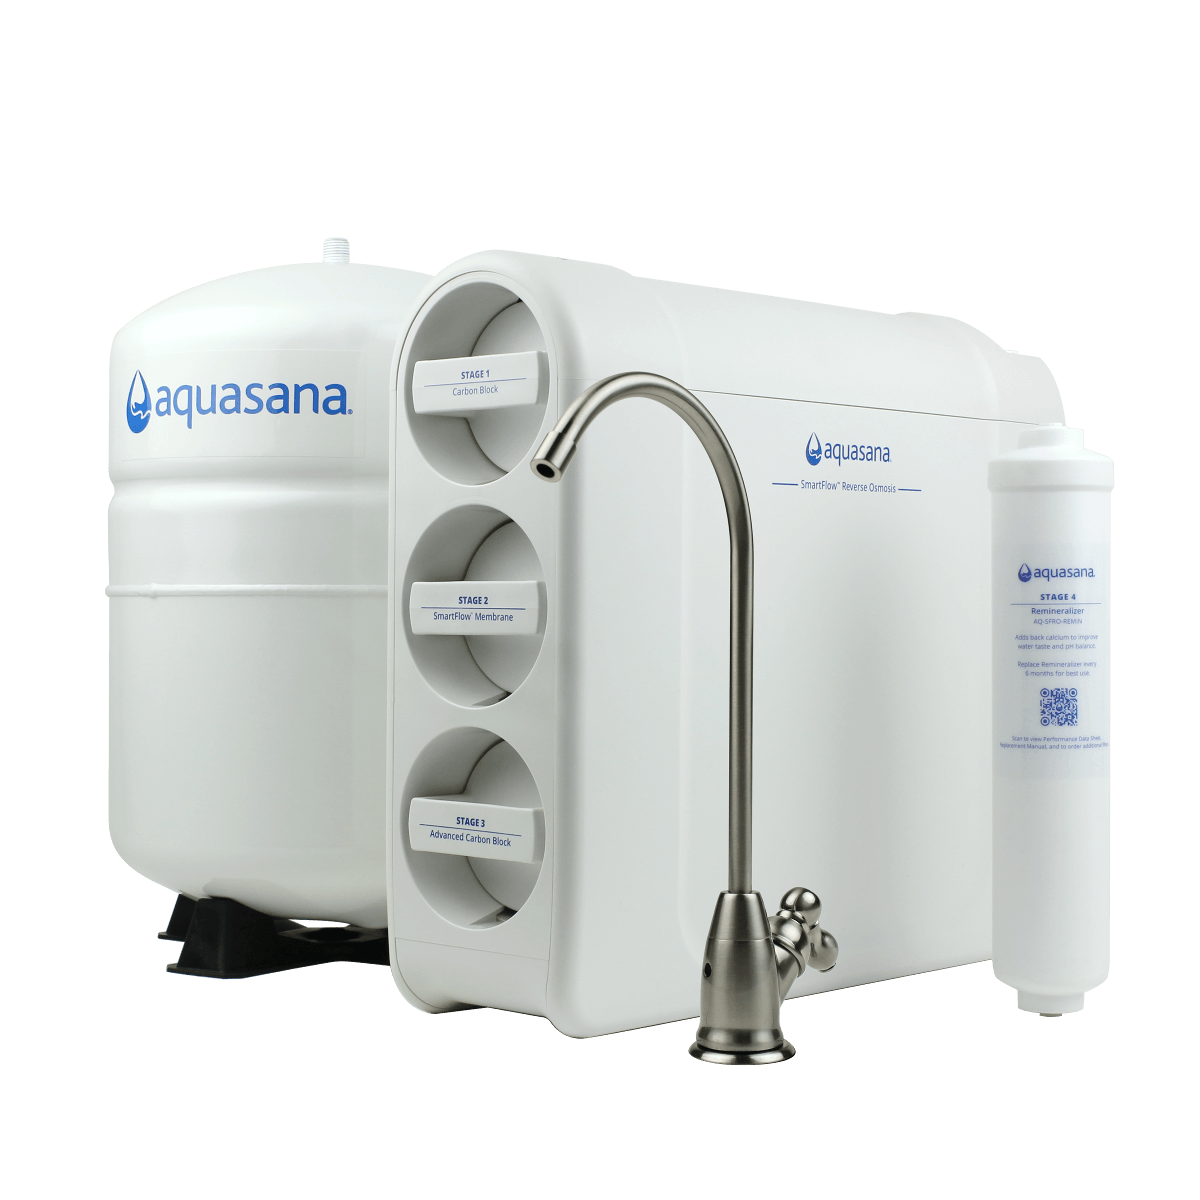 Residential Small Reverse Osmosis Water Storage Tank – Water and Filter